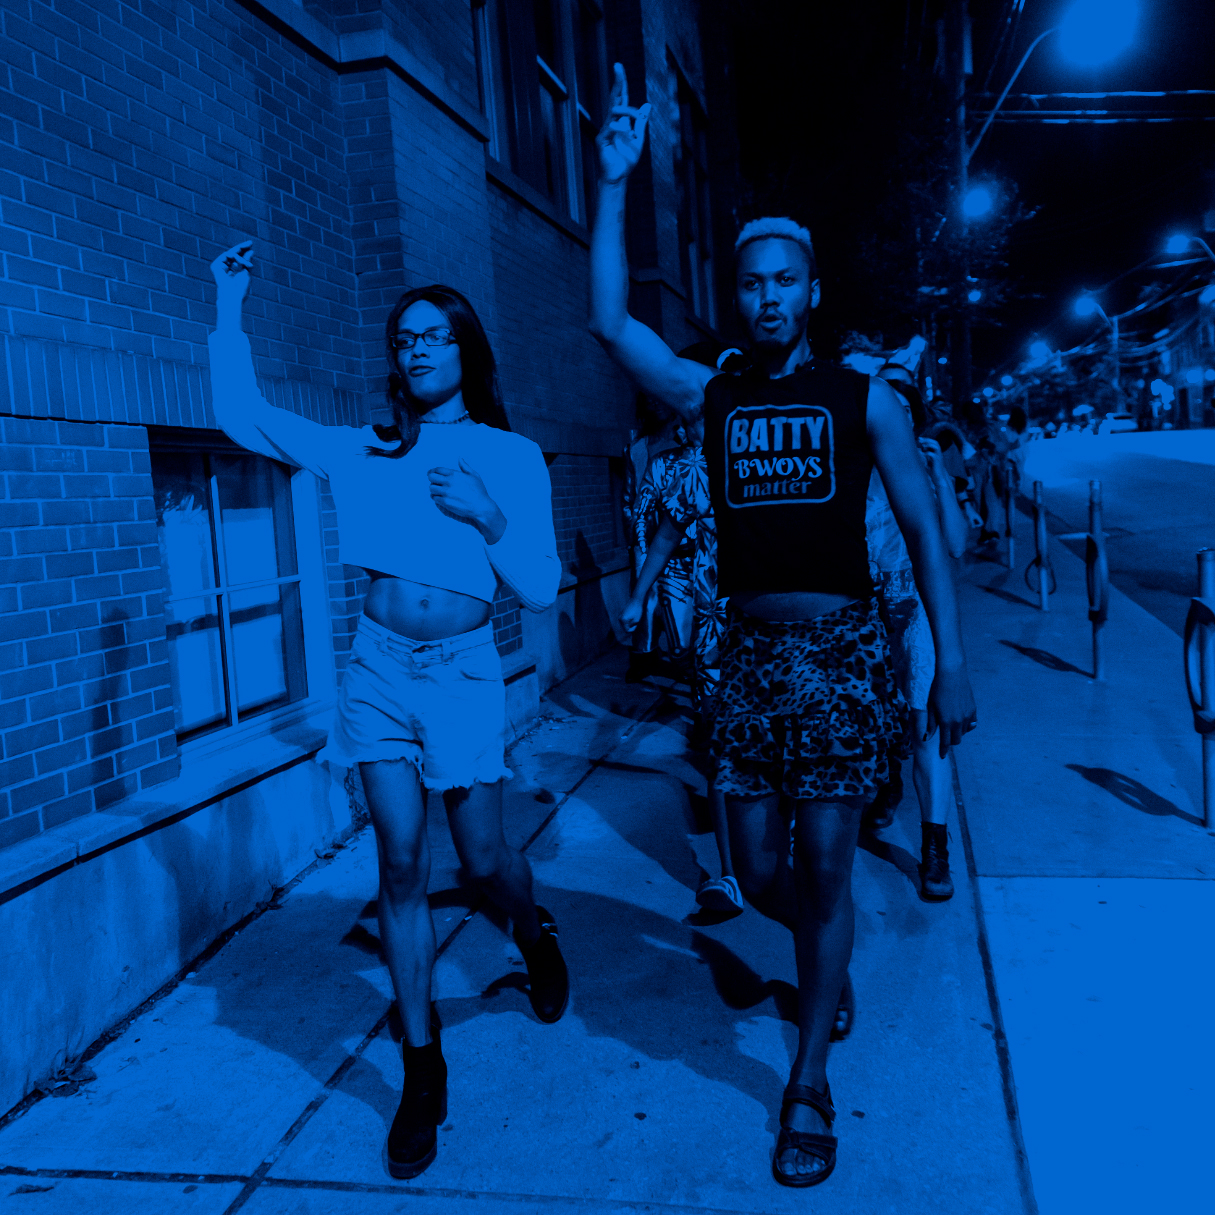 Two black performers with their fists raised are leading the audience down a sidewalk. One has short orange hair, a cheetah print skirt and a black shirt saying 'Batty Bwoys Matter'. The other has long black hair and is wearing a white crop top with jean shorts.